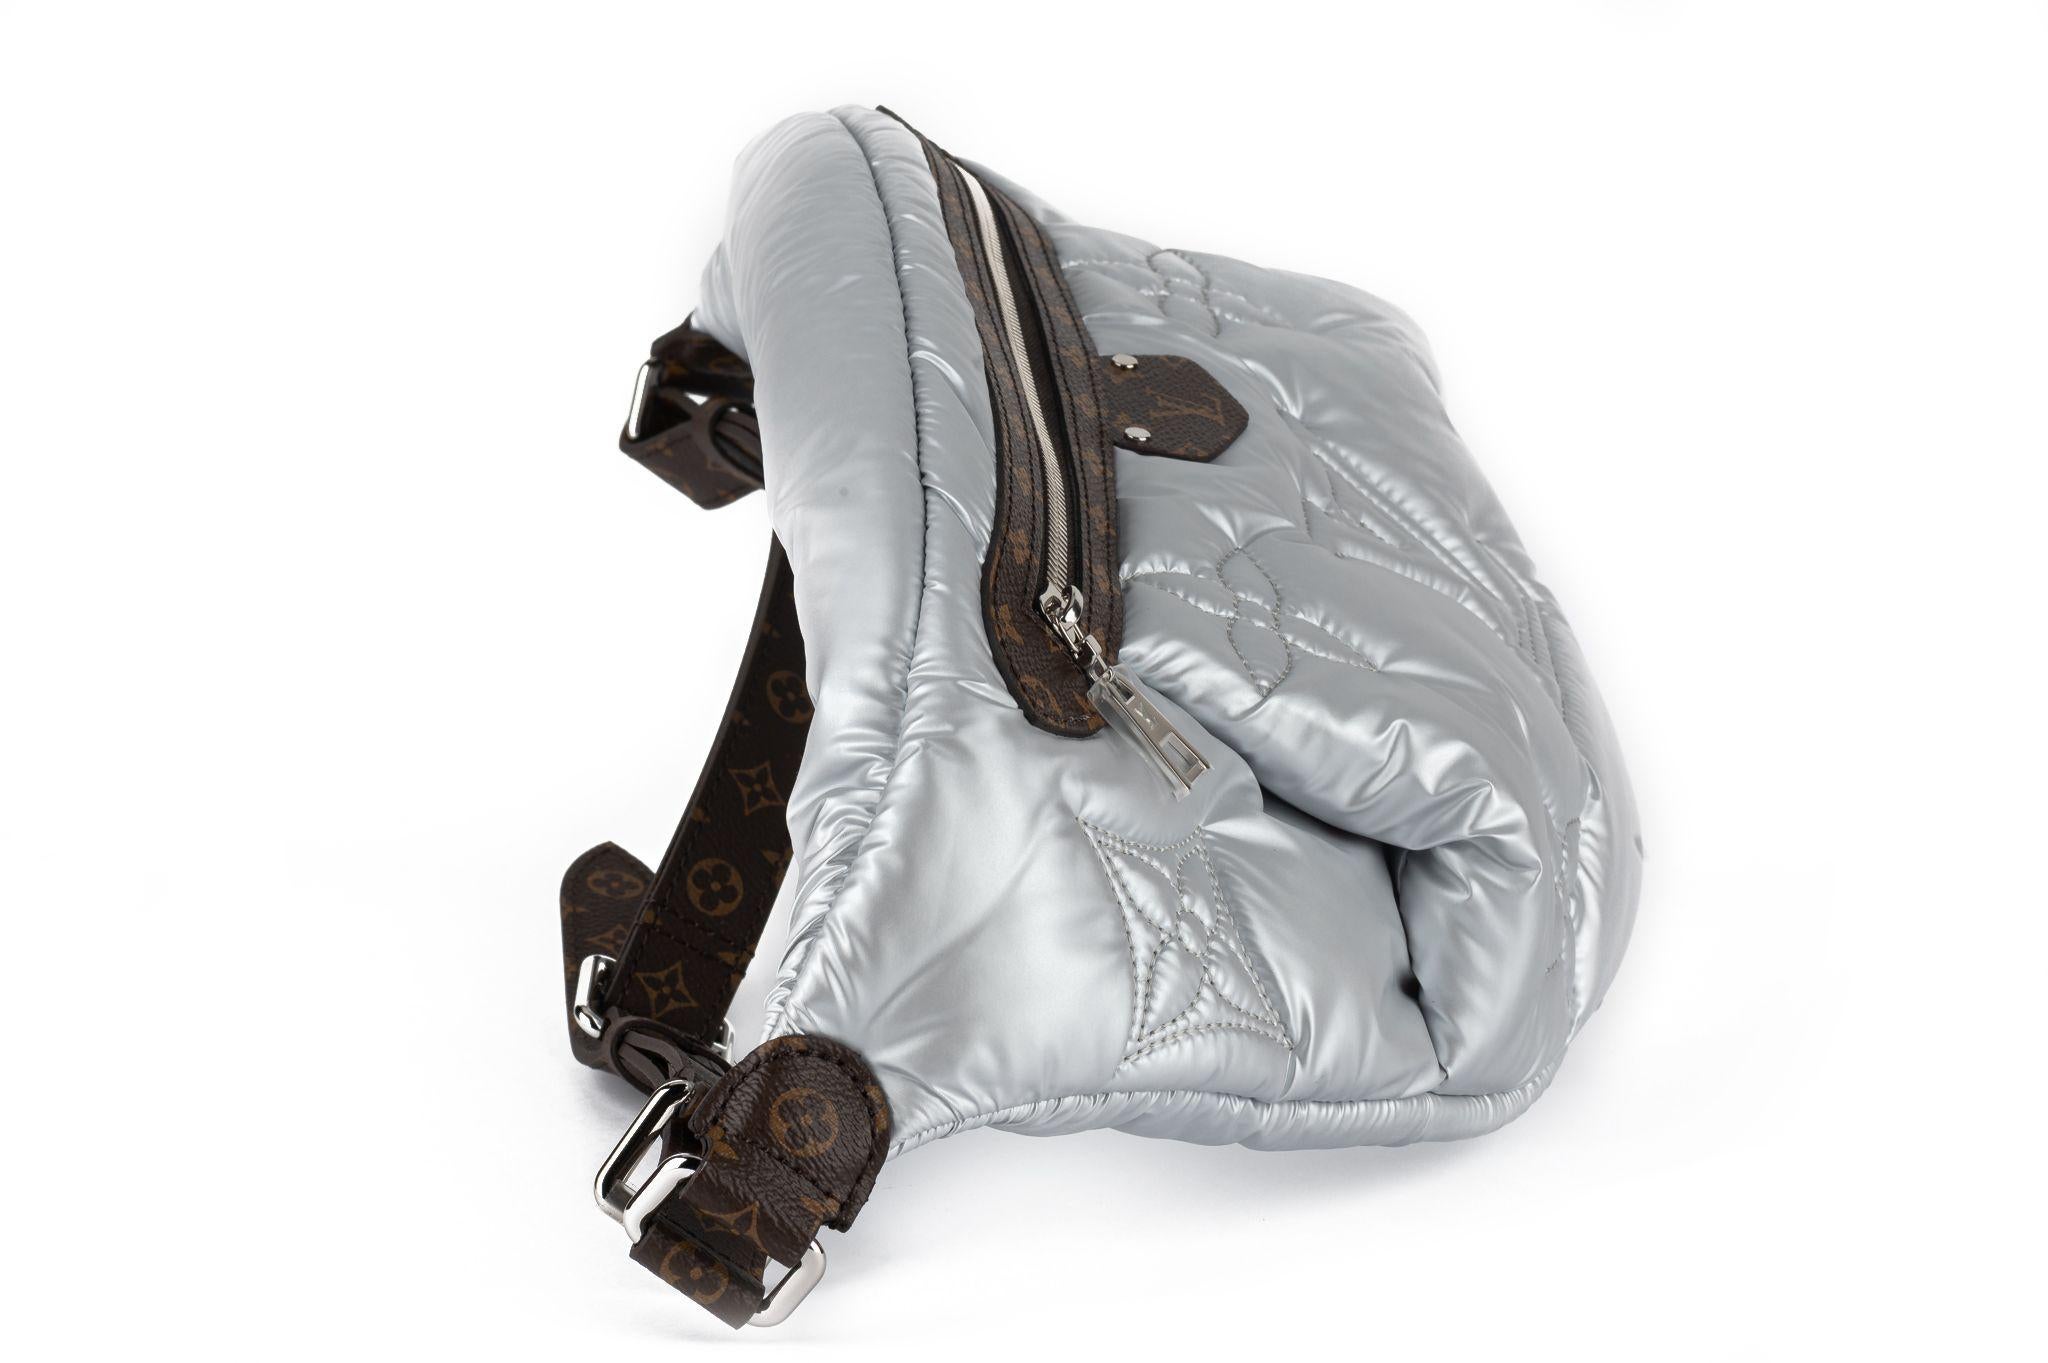 Louis Vuitton new collectible pillow bumbag in silver recycled eco nylon. Brown monogram details. Strap is removable and adjustable. Strap drop 9.8-19-8. Comes with original dustcover and box.
